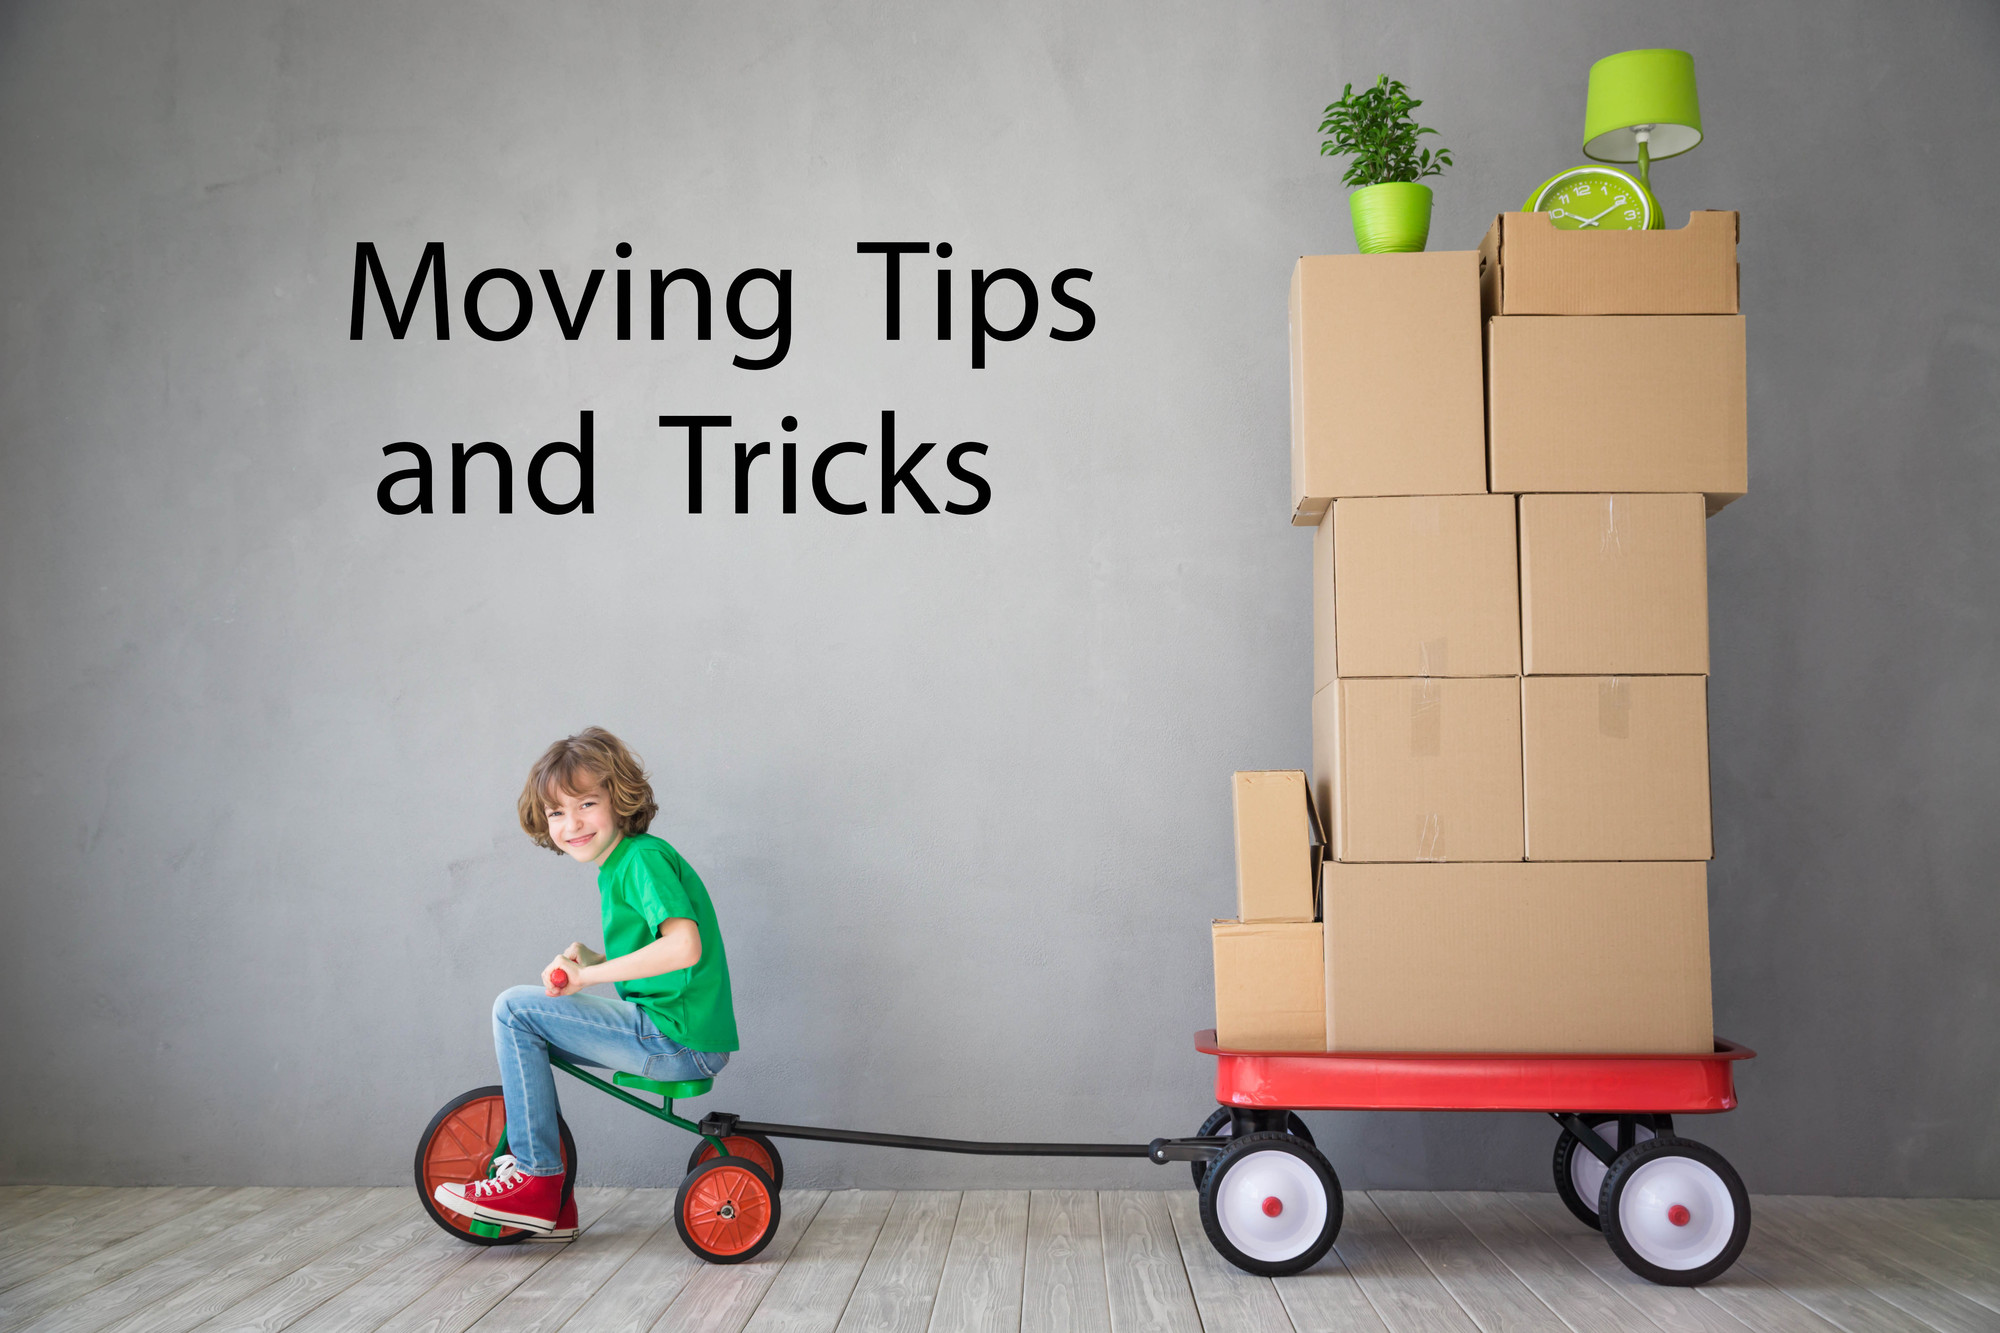 Moving Tips and Tricks